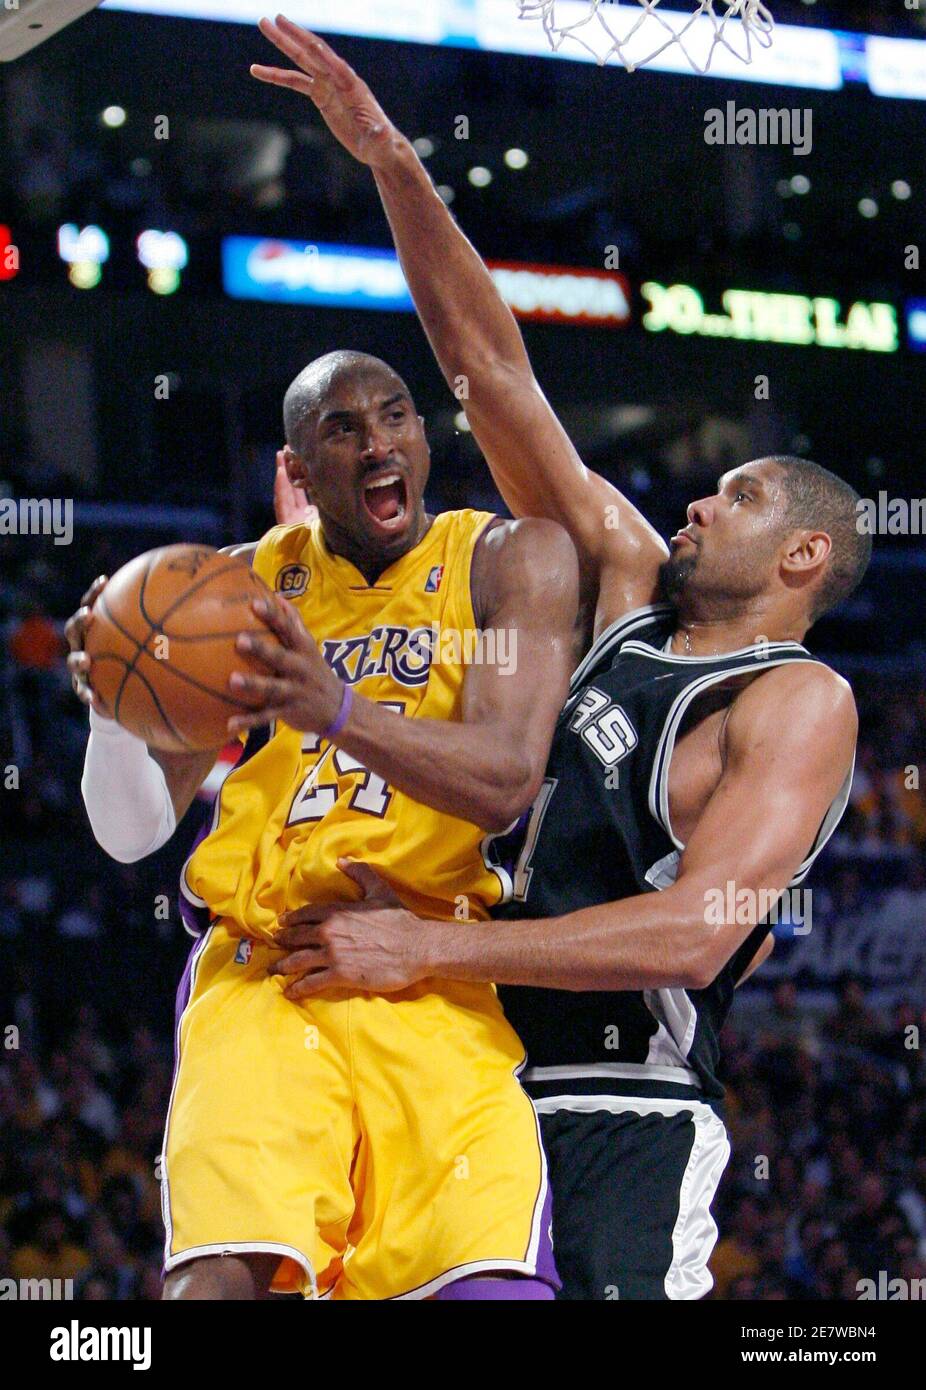 Los Angeles Lakers Kobe Bryant drives under the basket as San Antonio Spurs Tim Duncan defends during Game 5 of their NBA Western Conference final basketball playoff series in Los Angeles, May 29, 2008.      REUTERS/Gus Ruelas (UNITED STATES) Stock Photo